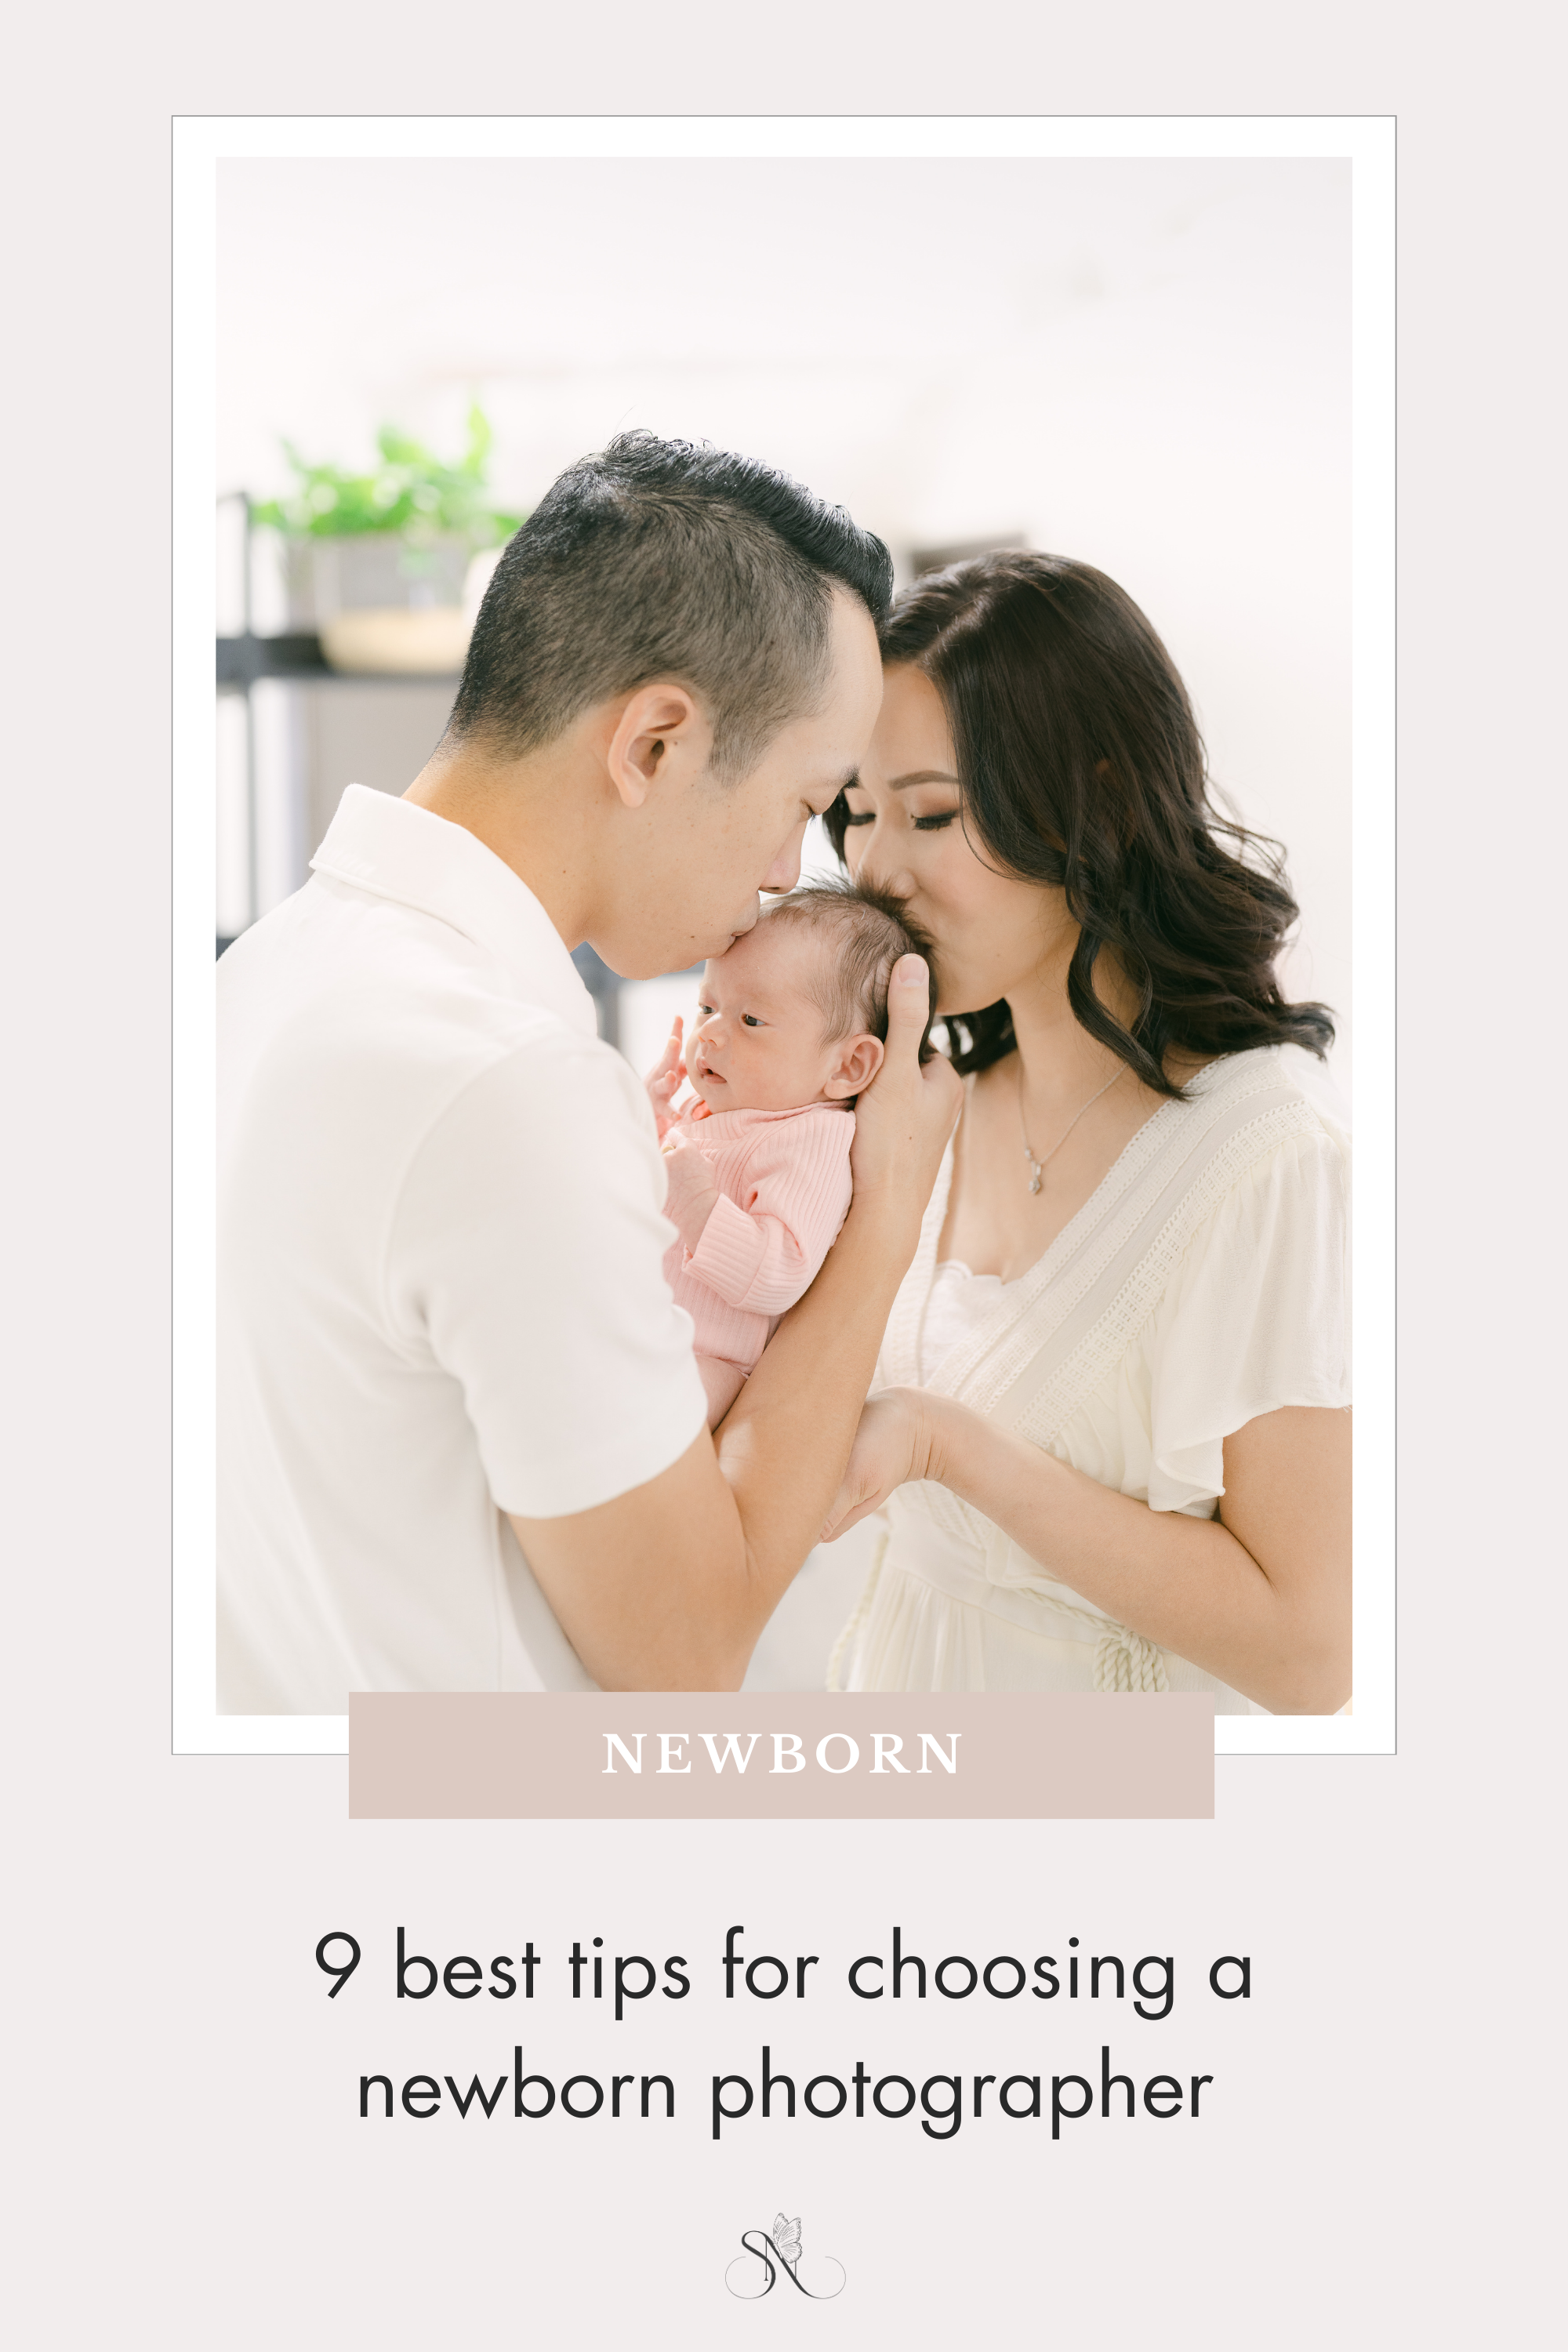 in-home newborn photography with baby girl and parents